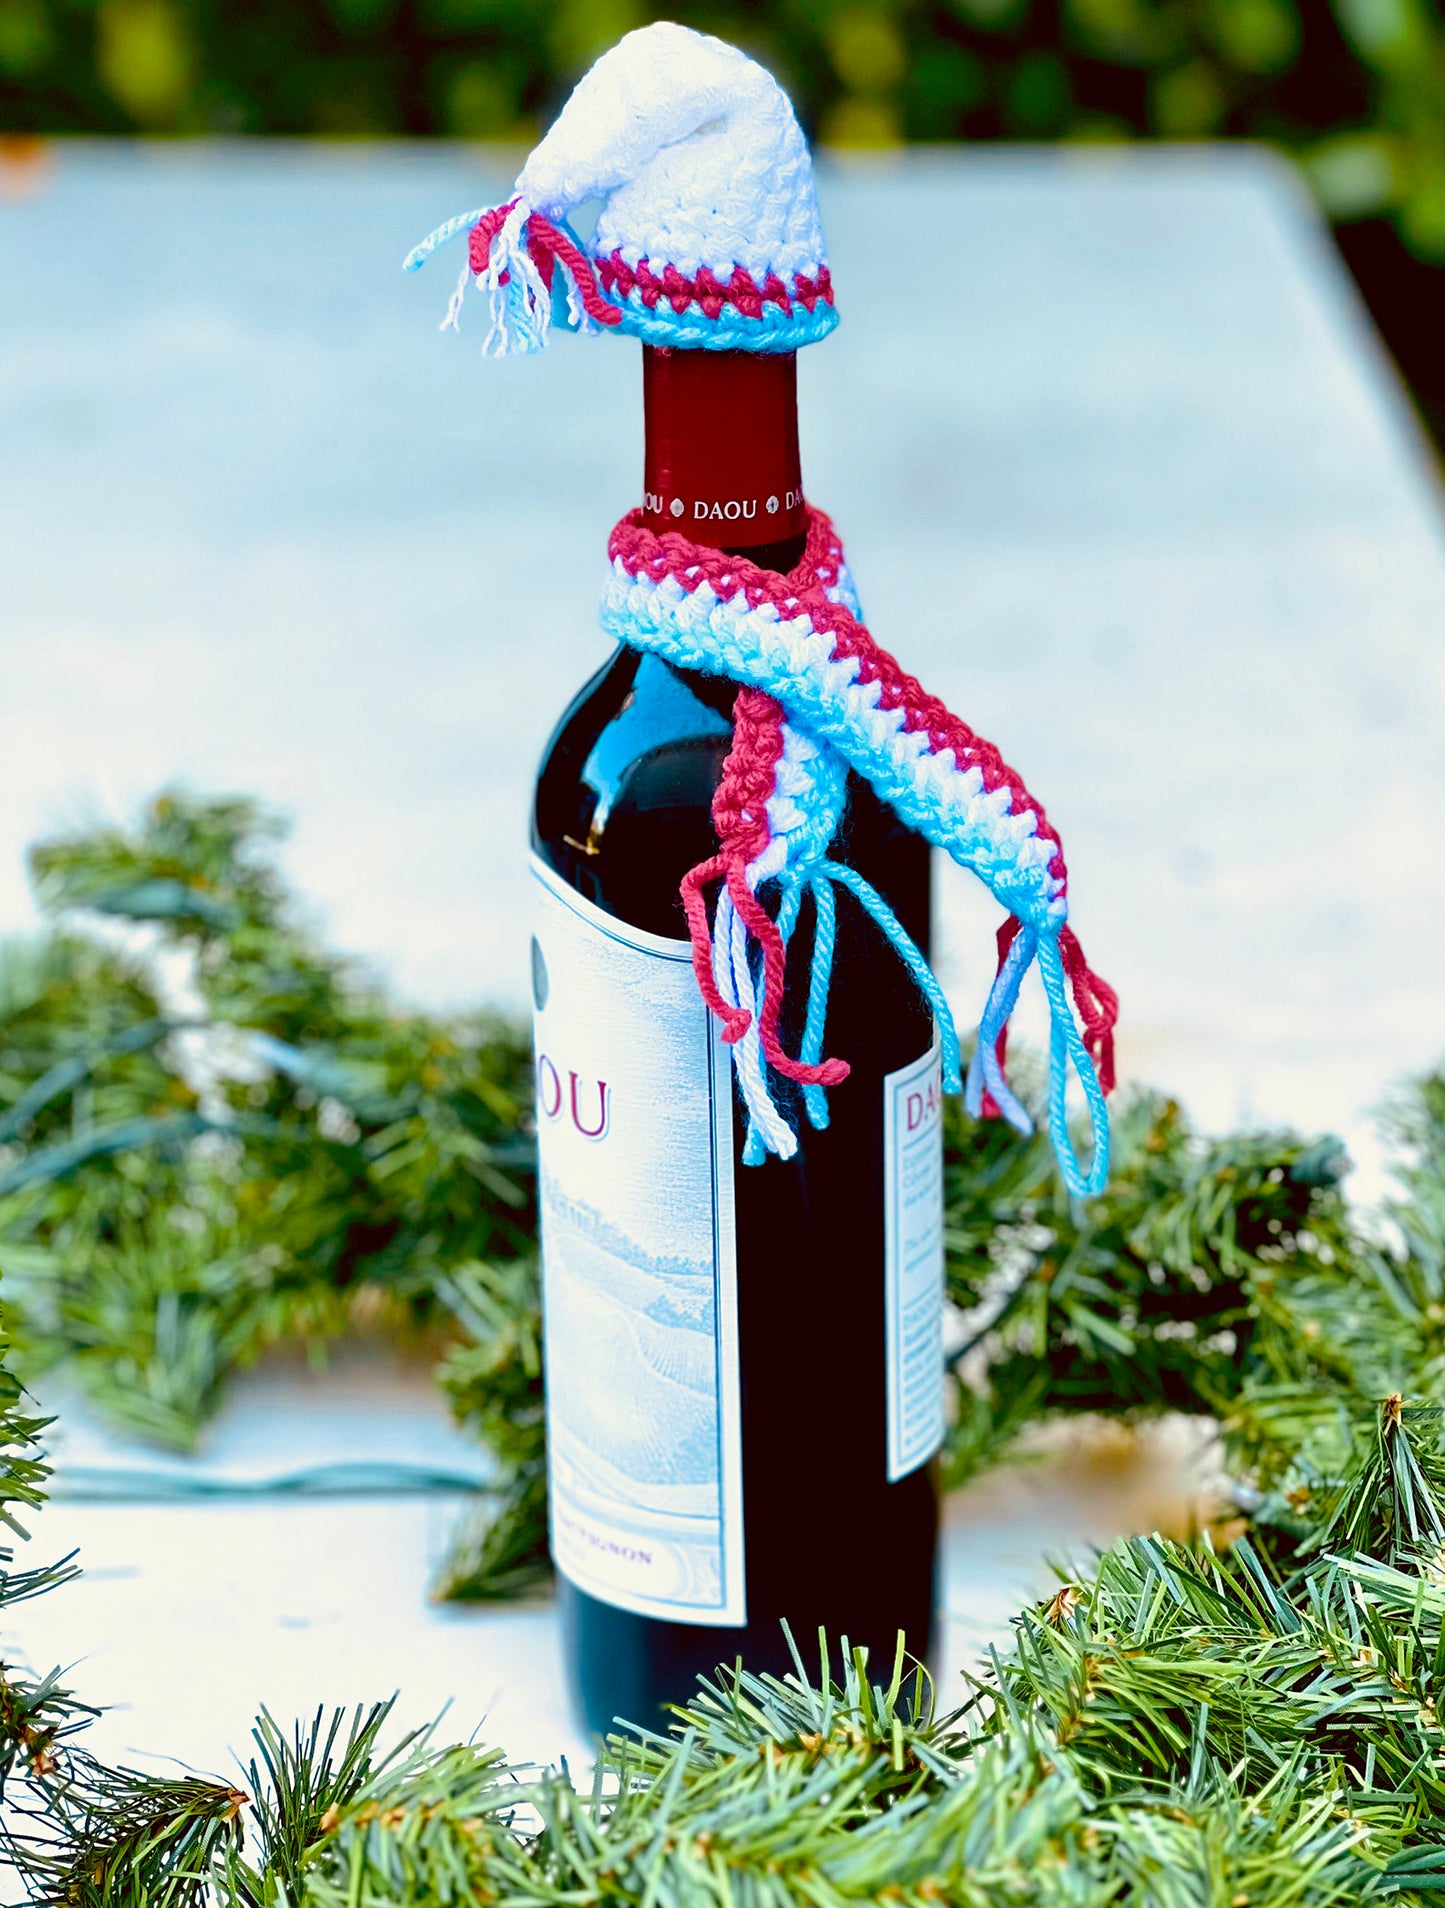 These knitted wine bottle topper hat & scarf sets make gift giving more fun. Made from upcycled acrylic yarn in three different festive styles. Made to order, please allow 3 to 7 days depending how many sets are ordered. Colors may also vary depending on availability. Acrylic yarn Hand wash cold, line dry Handmade in California